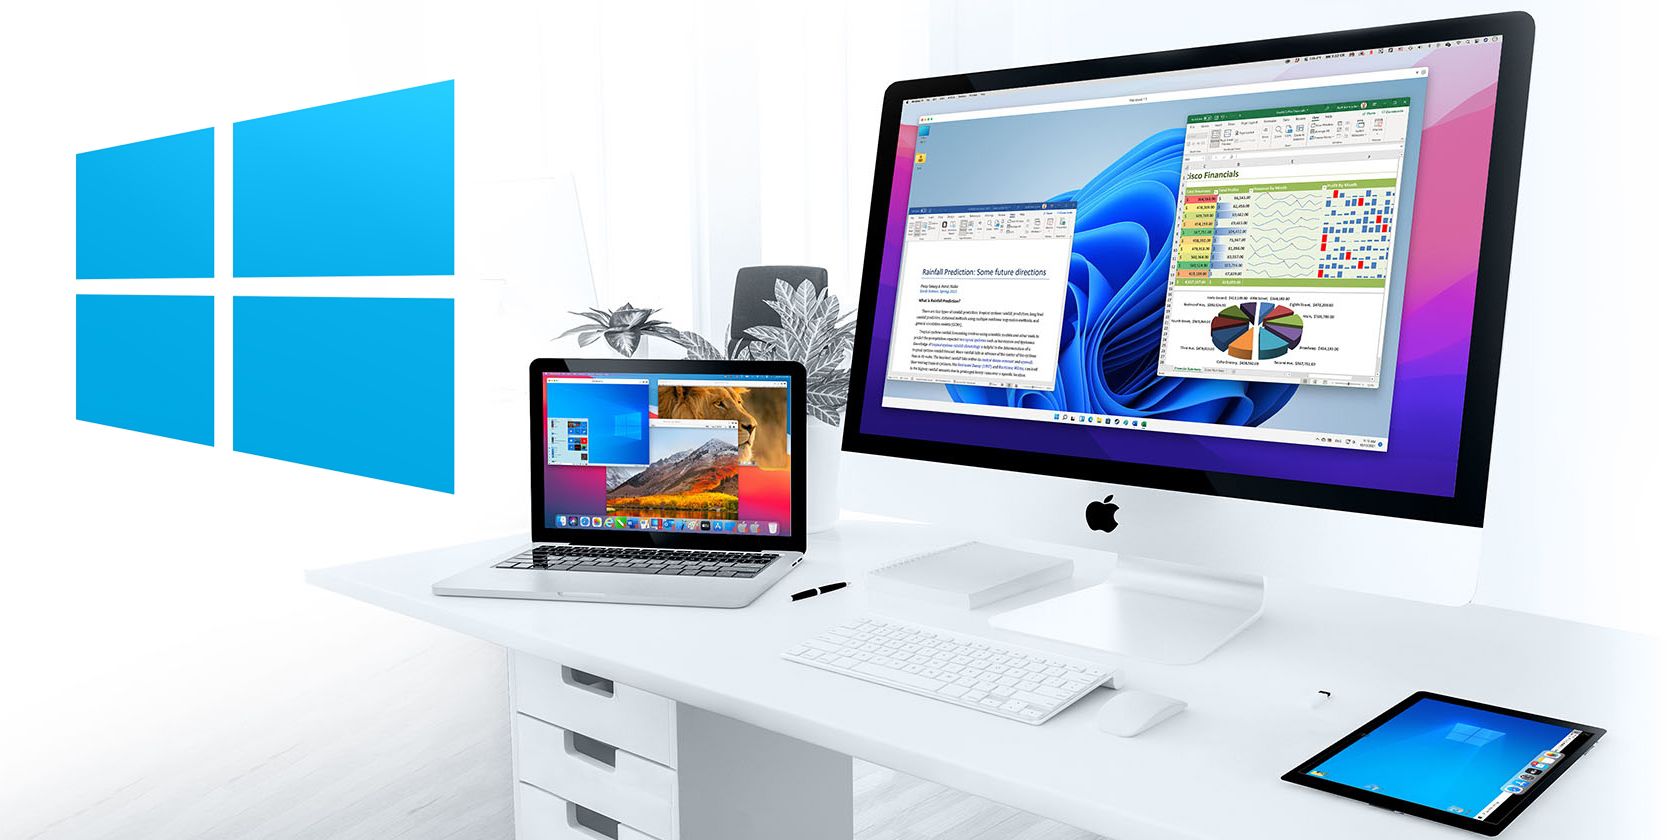 Parallels Desktop on Apple Silicon Macs with Windows logo